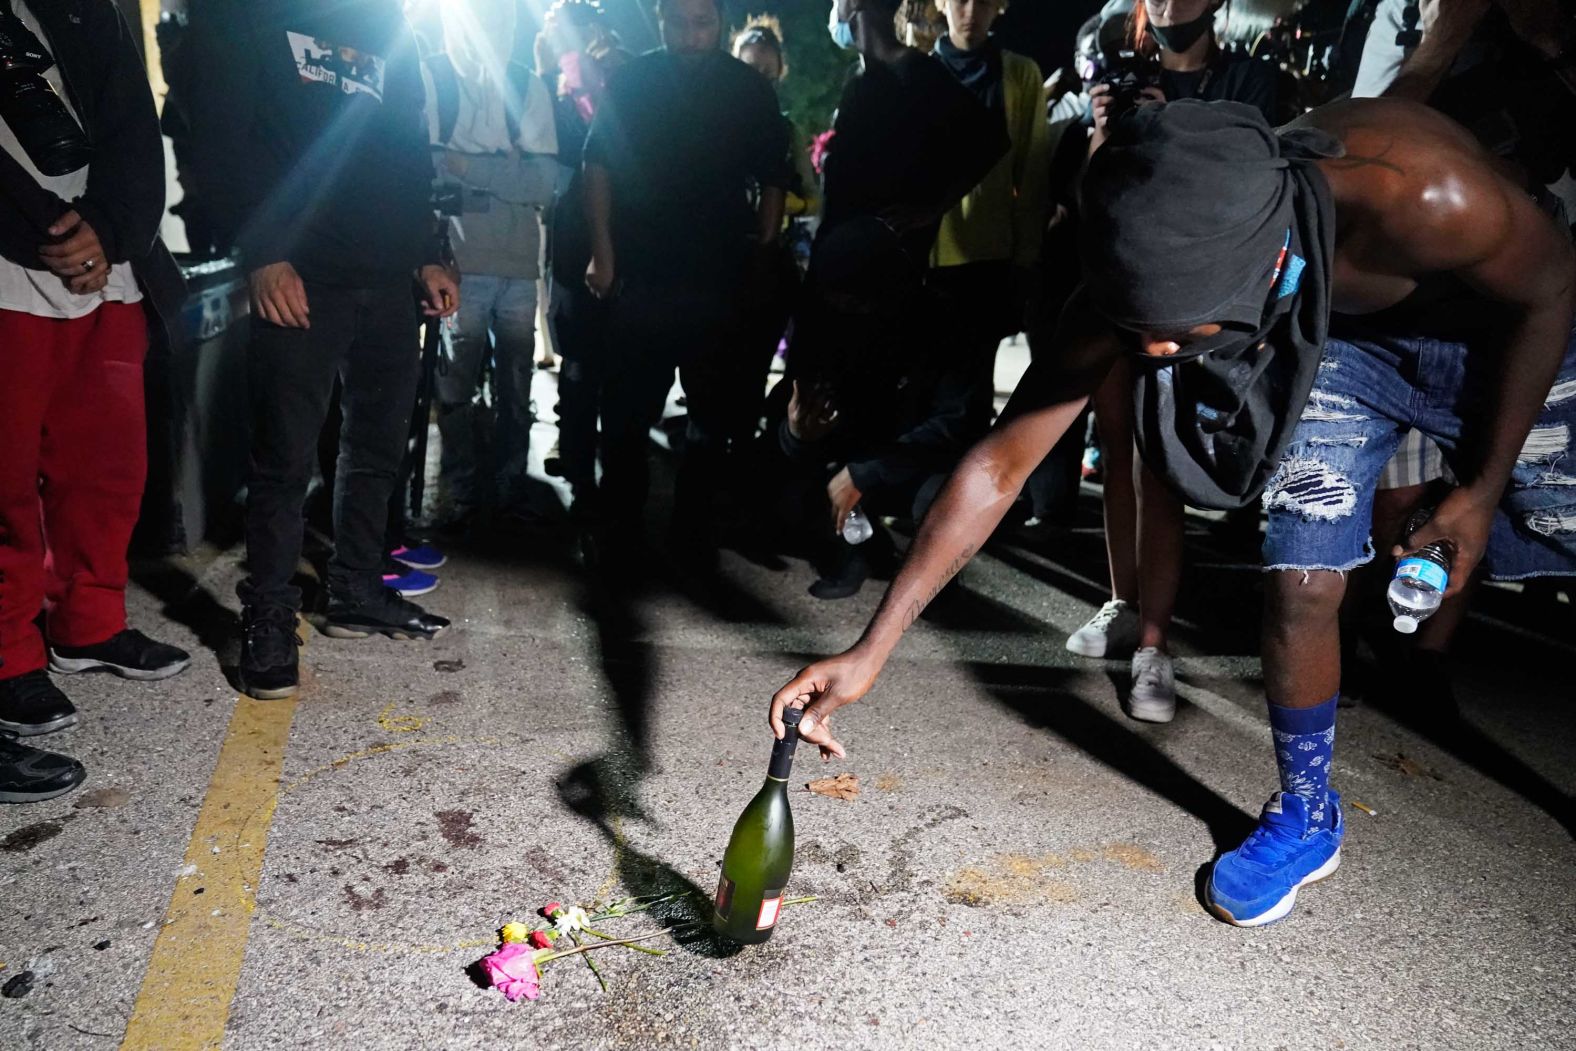 A protester places a bottle at the scene where <a href="index.php?page=&url=https%3A%2F%2Fwww.cnn.com%2F2020%2F08%2F26%2Fus%2Fkenosha-wisconsin-wednesday-shooting%2Findex.html" target="_blank">a person was fatally shot during demonstrations</a> the night before.